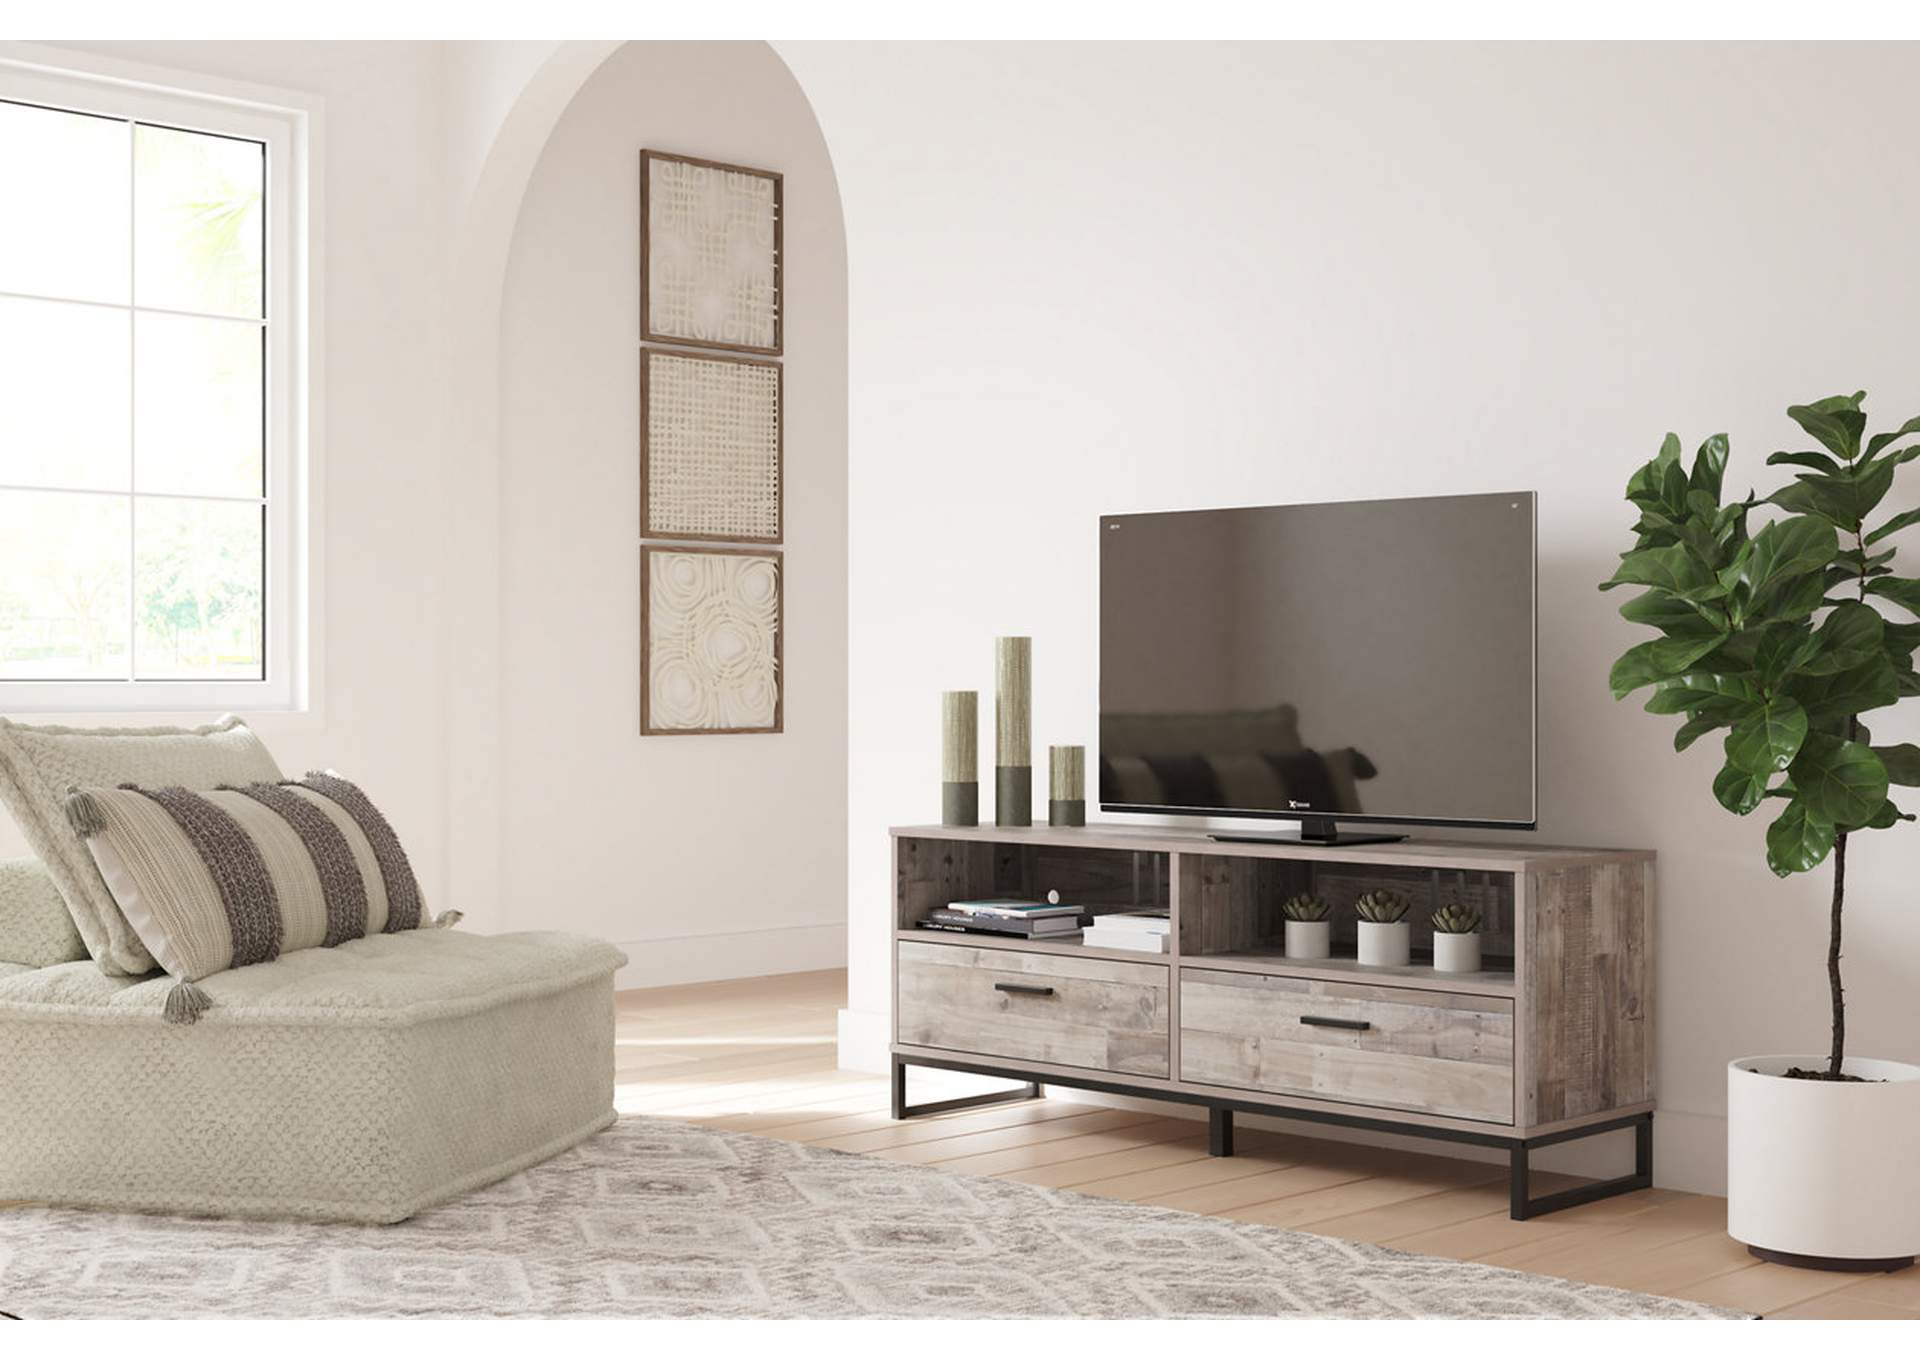 Neilsville 59" TV Stand,Signature Design By Ashley